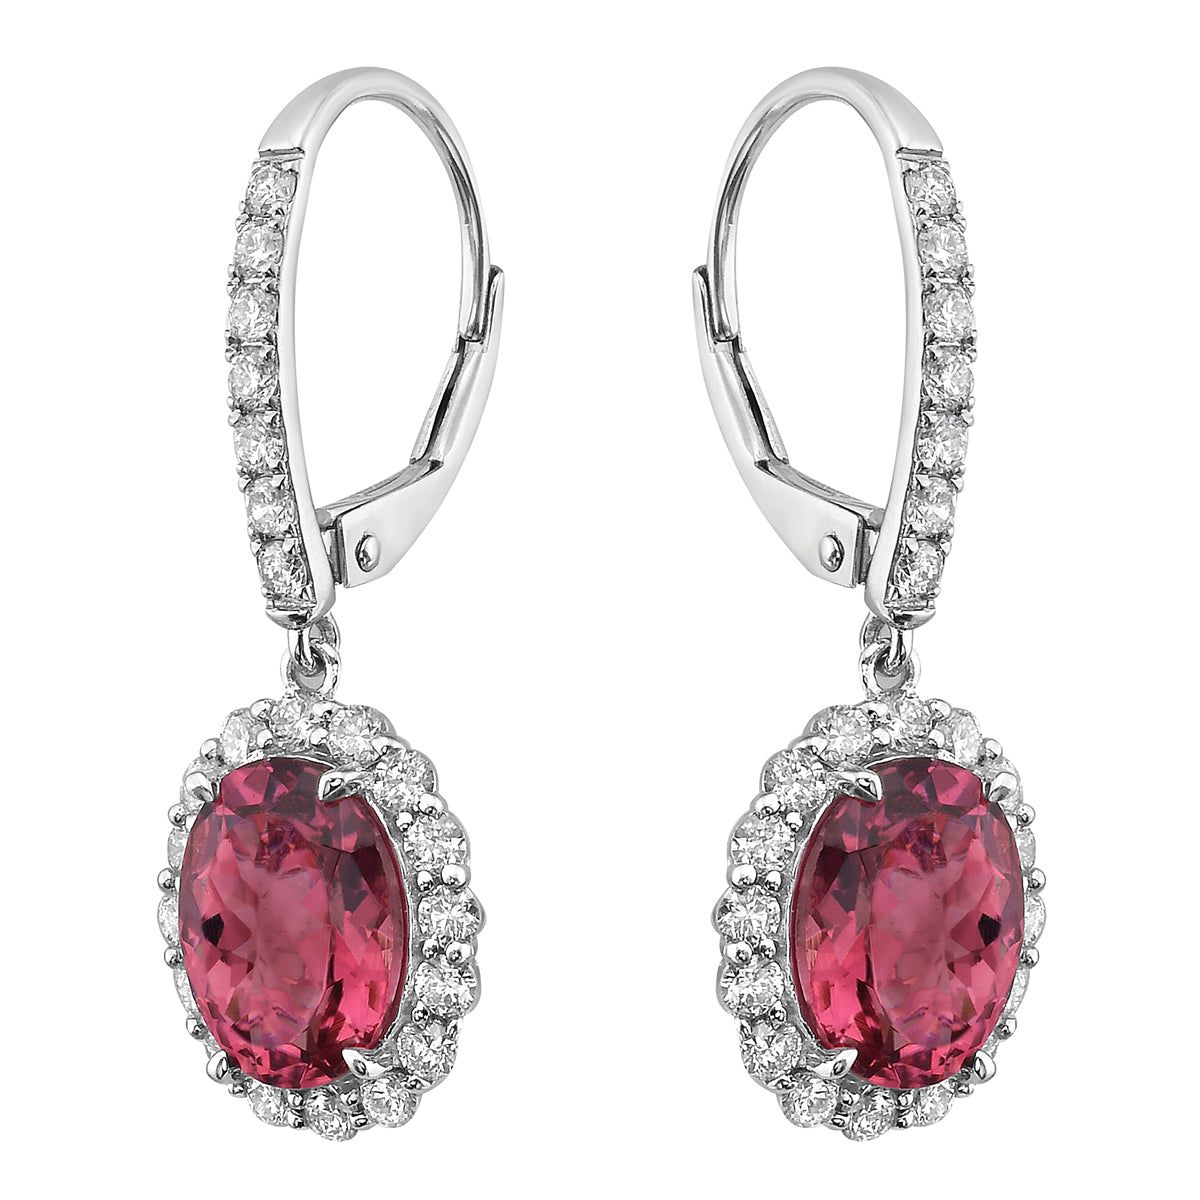 Earrings 14KW/2.8G 2PT-3.59CT 46RD-0.91CT Pink Tourmine